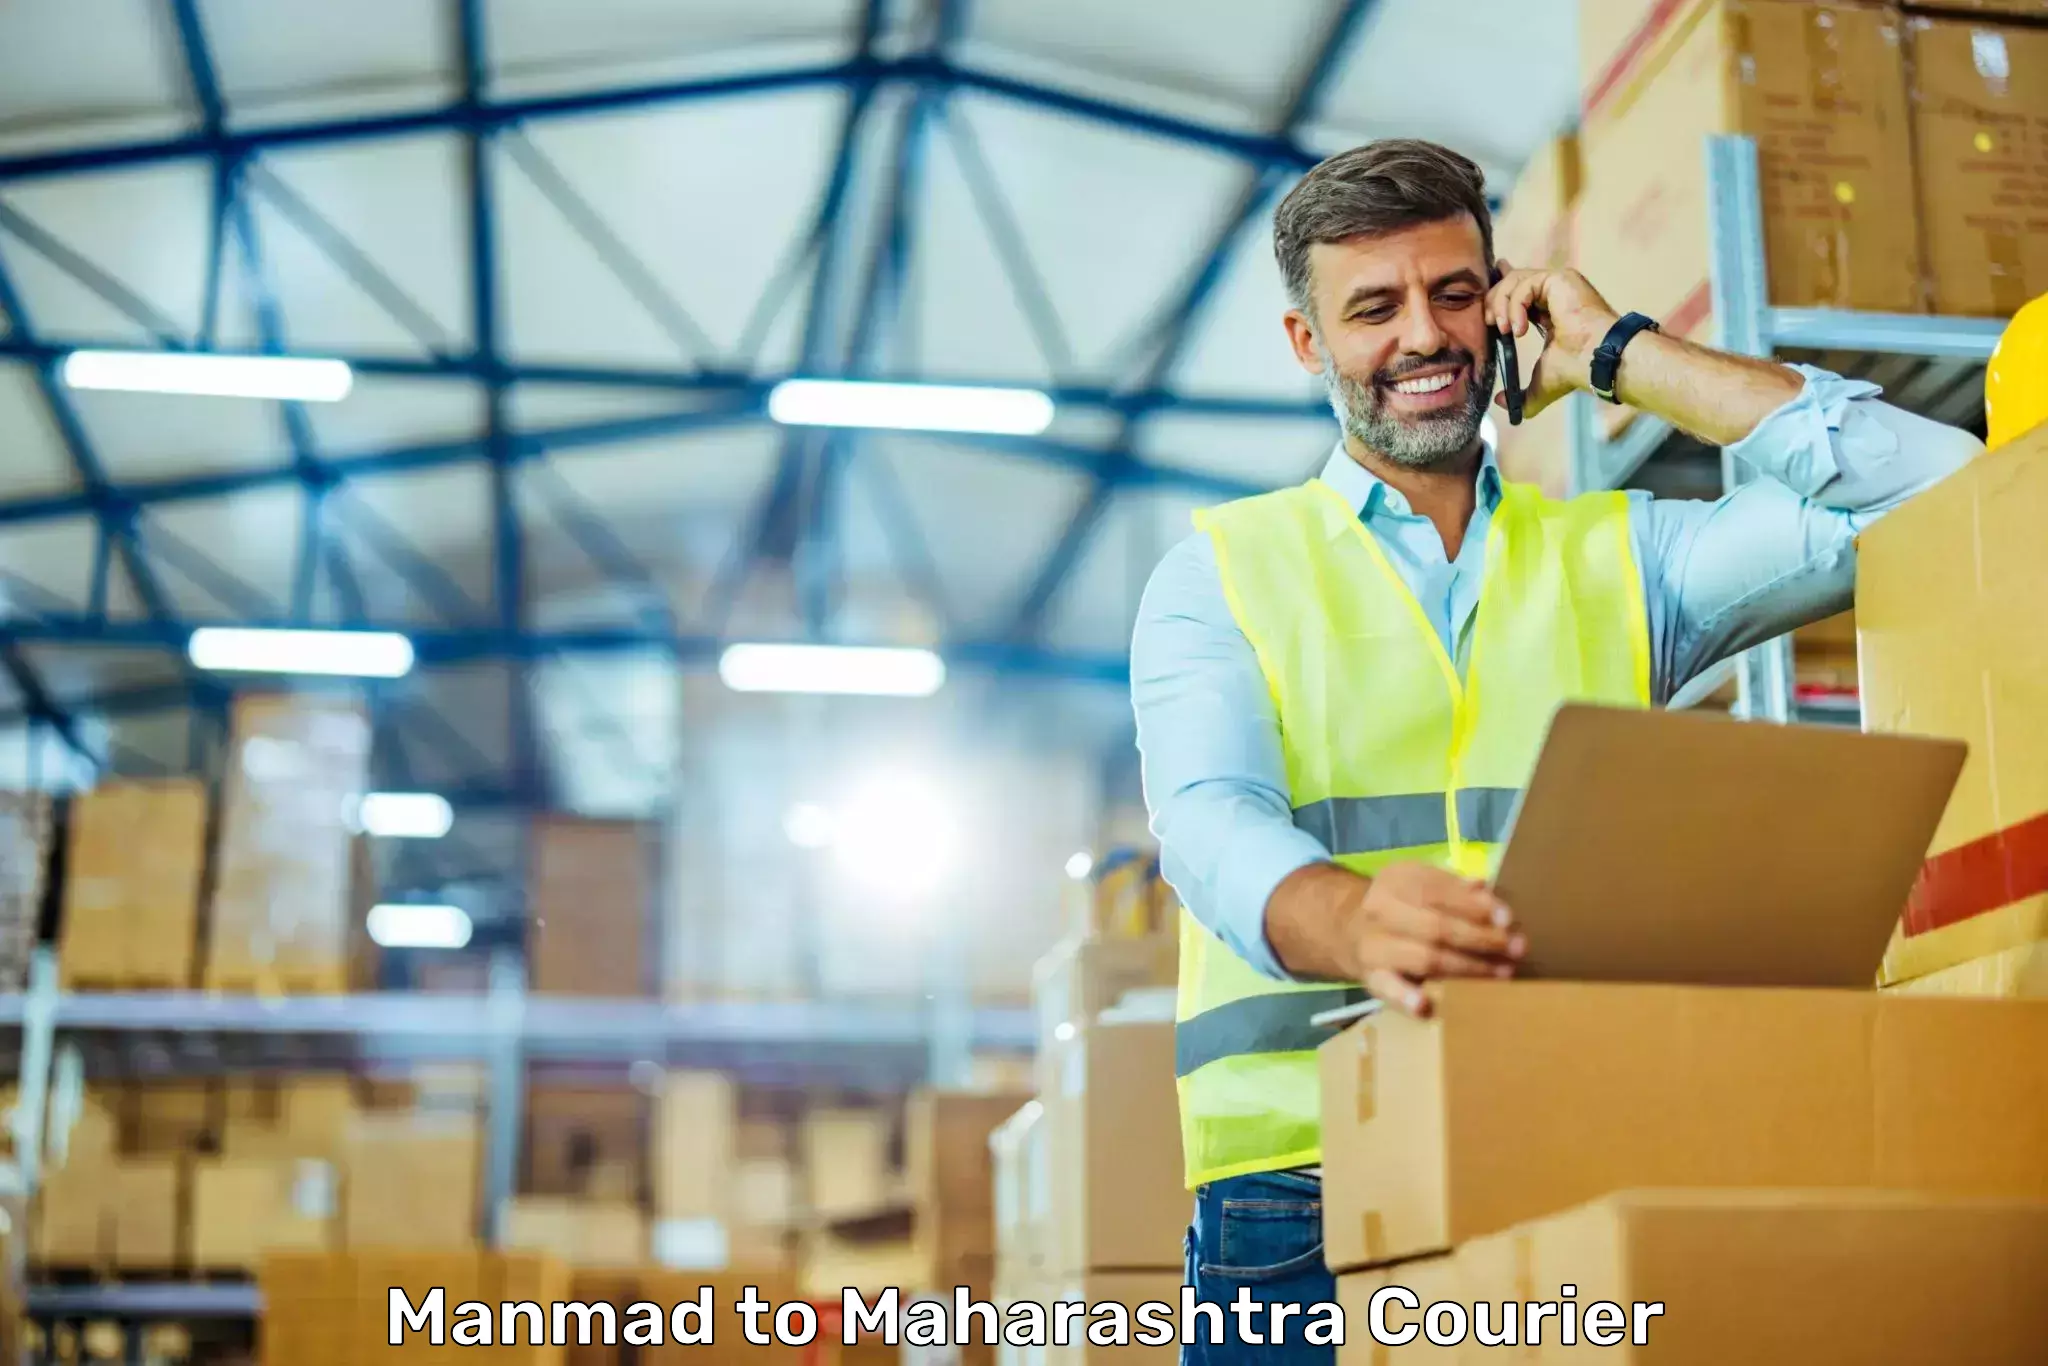 Customer-focused courier in Manmad to Pune